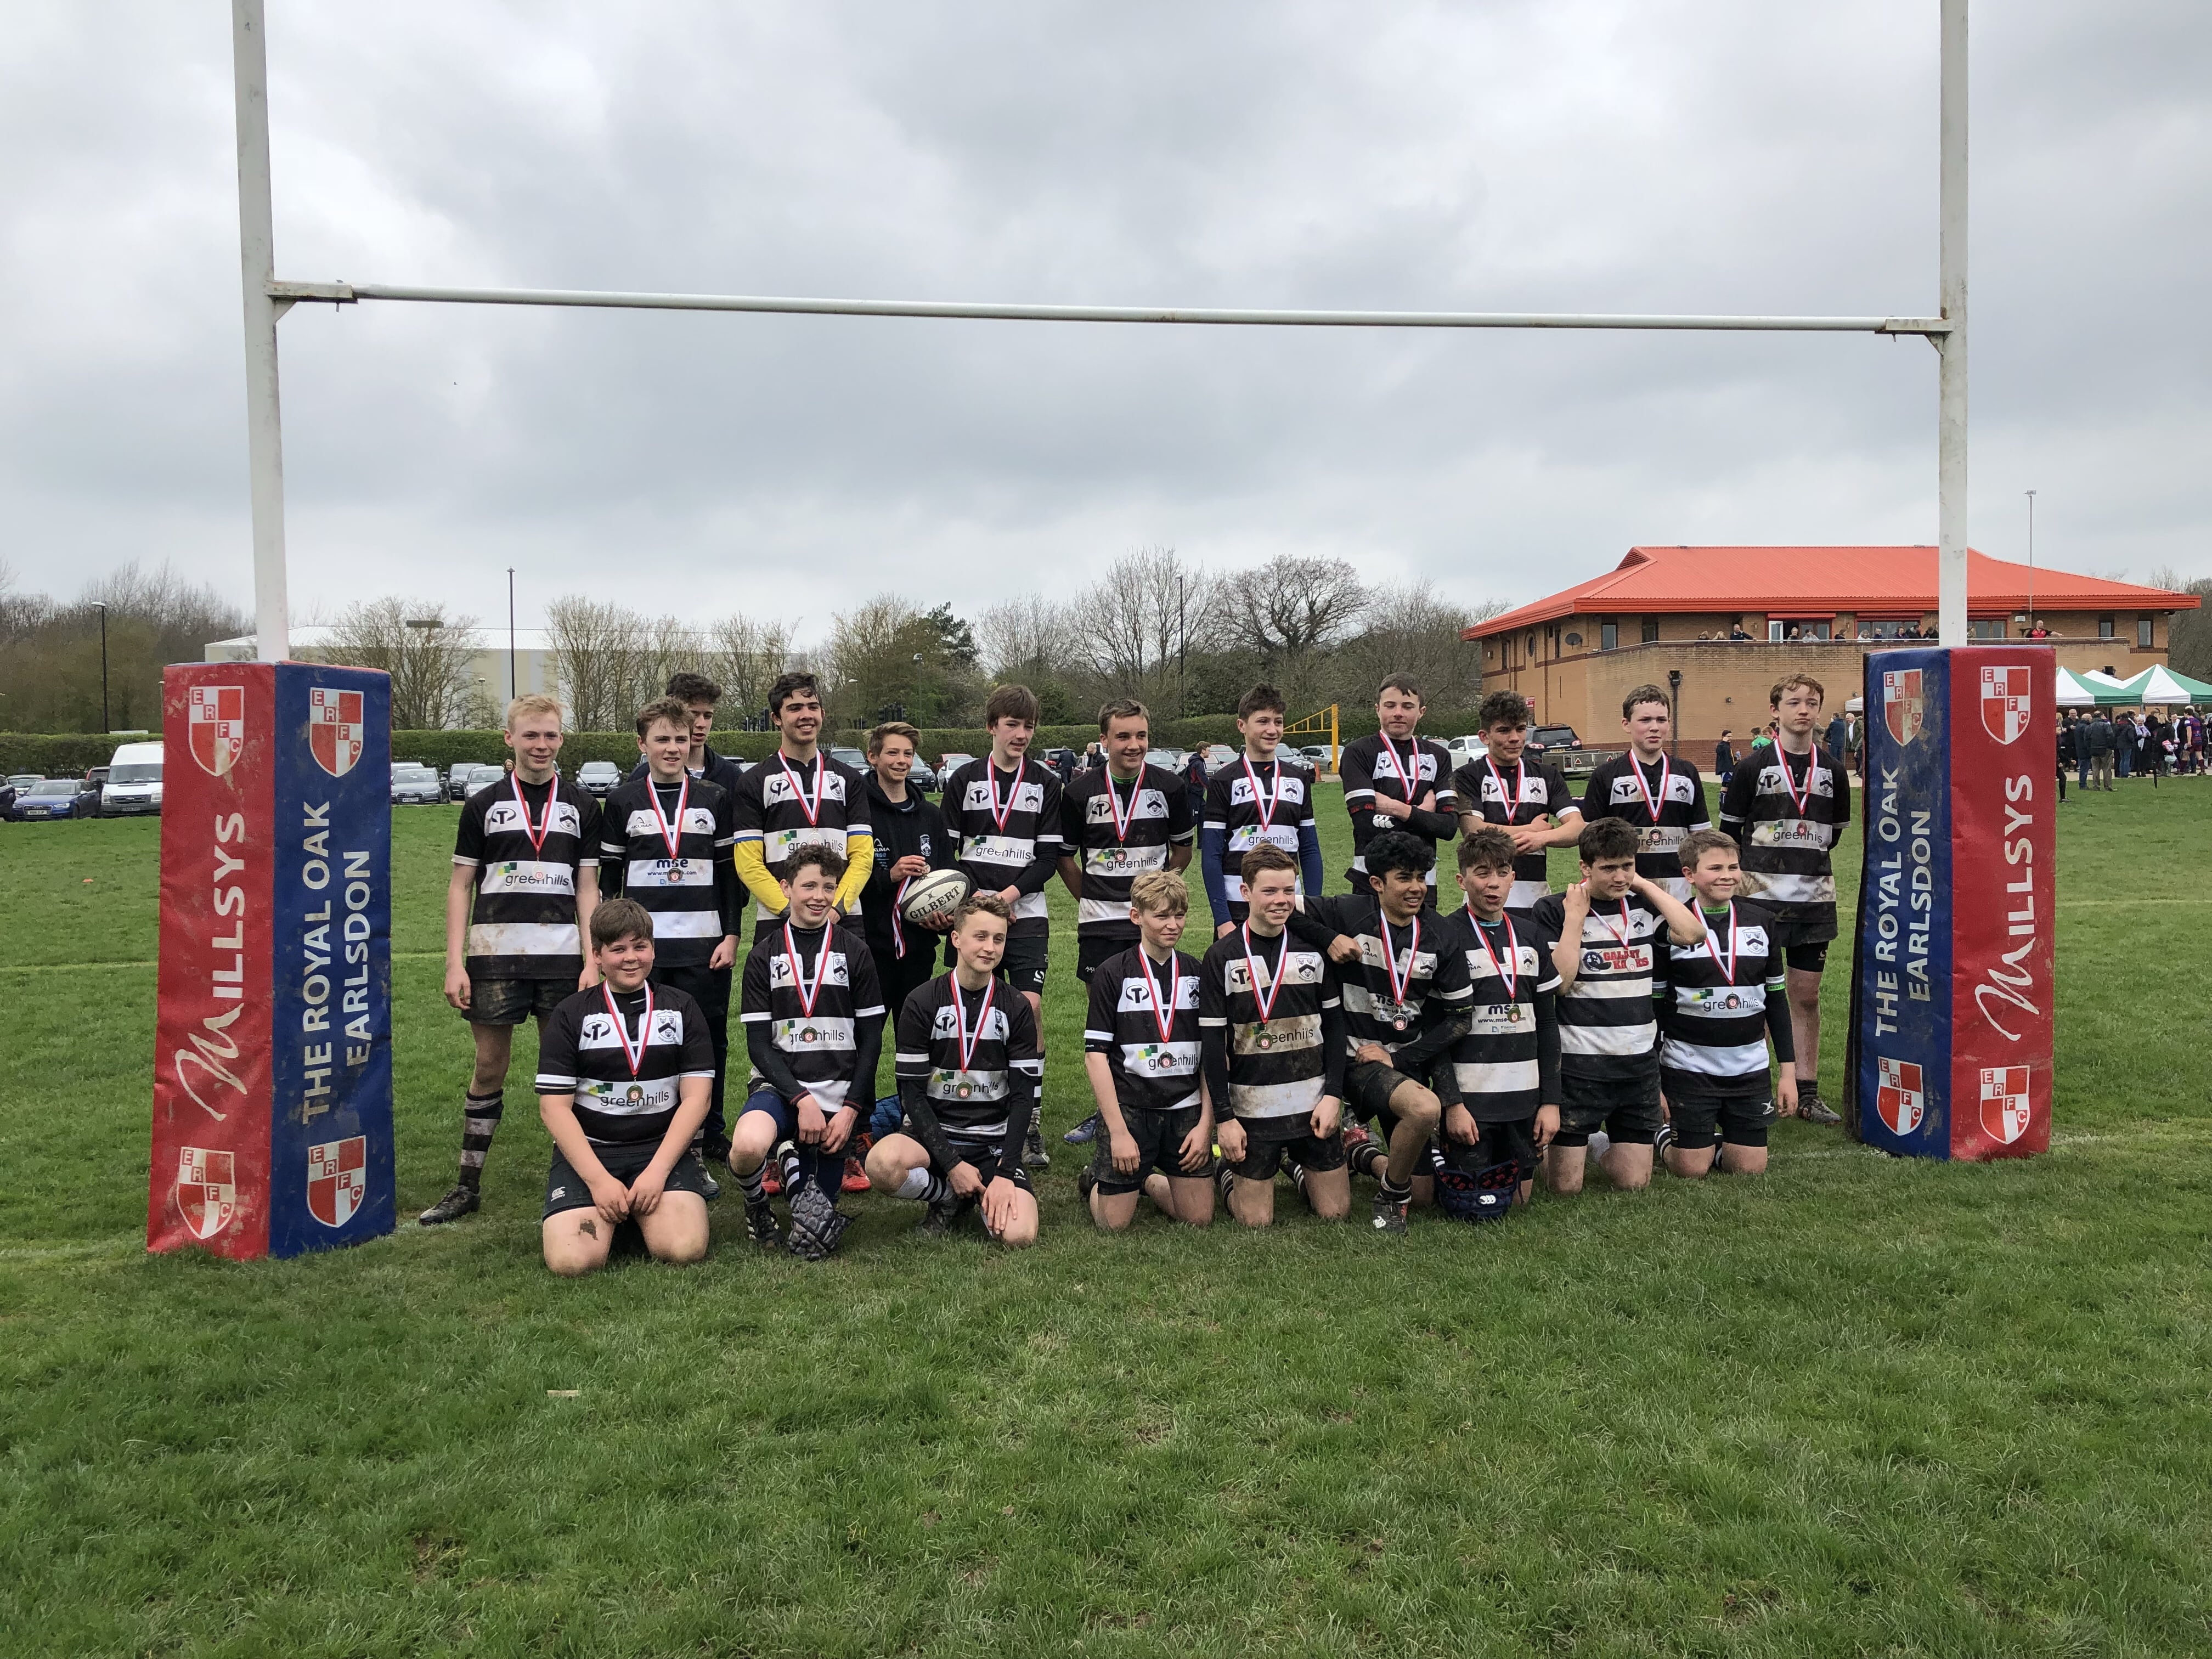 Rugby Team With Posts Behind Them